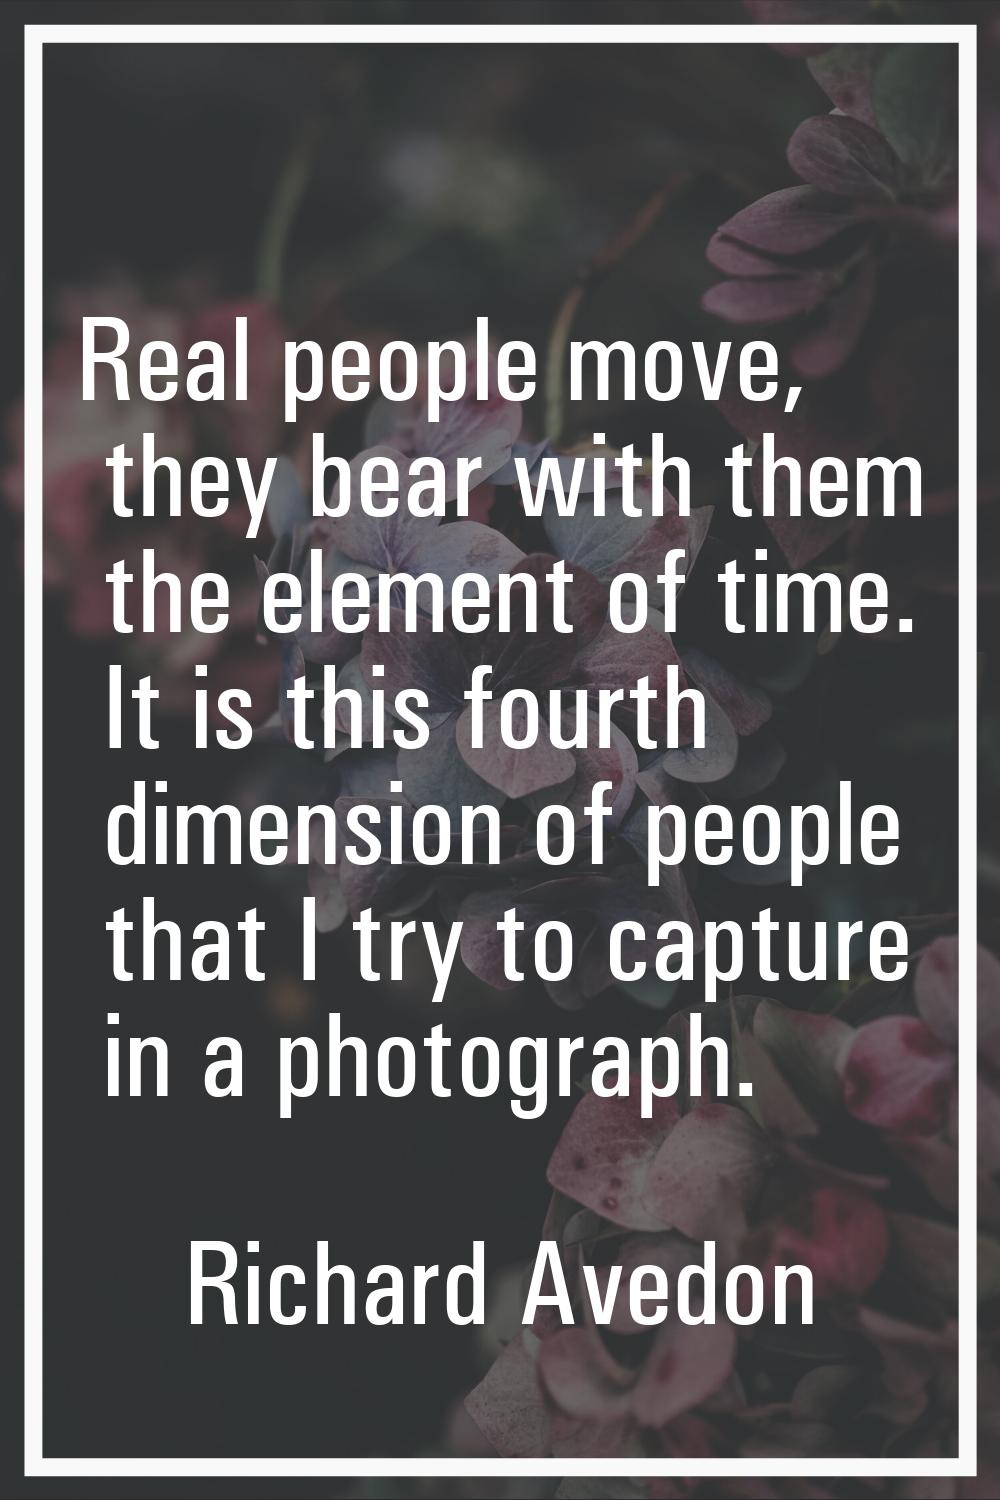 Real people move, they bear with them the element of time. It is this fourth dimension of people th